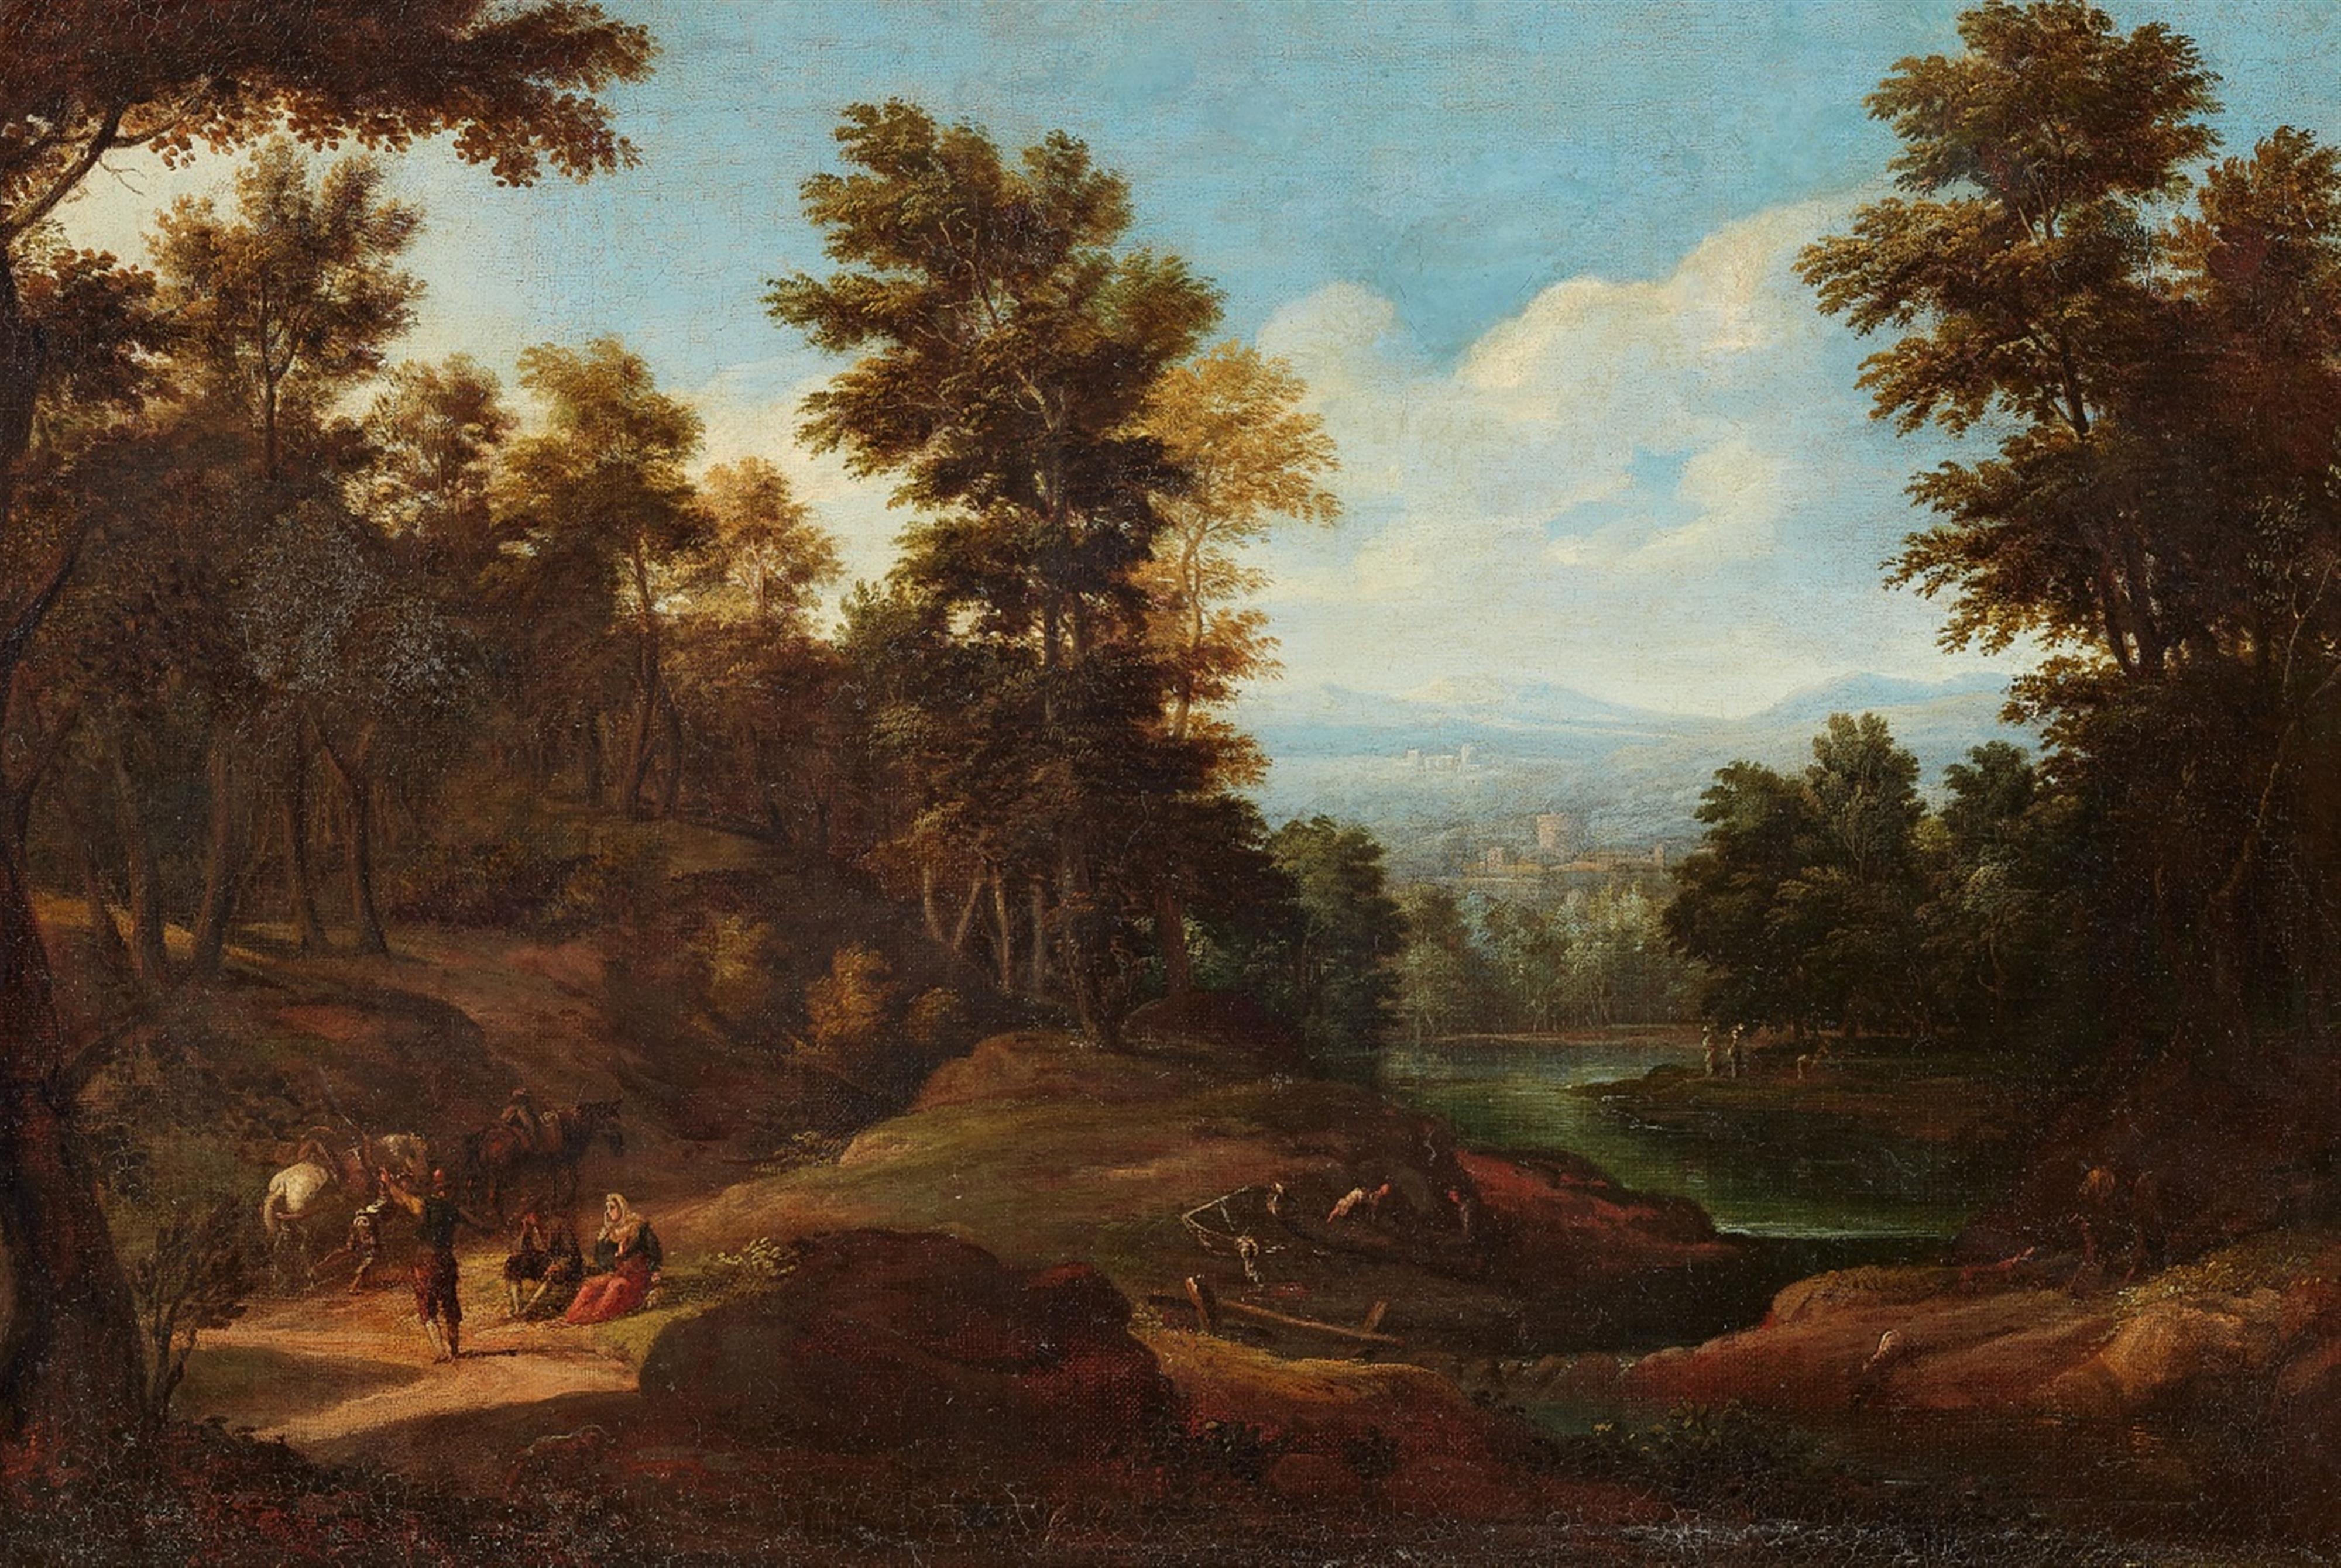 Flemish School, 18th century - Wooded Landscape with Figures - image-1